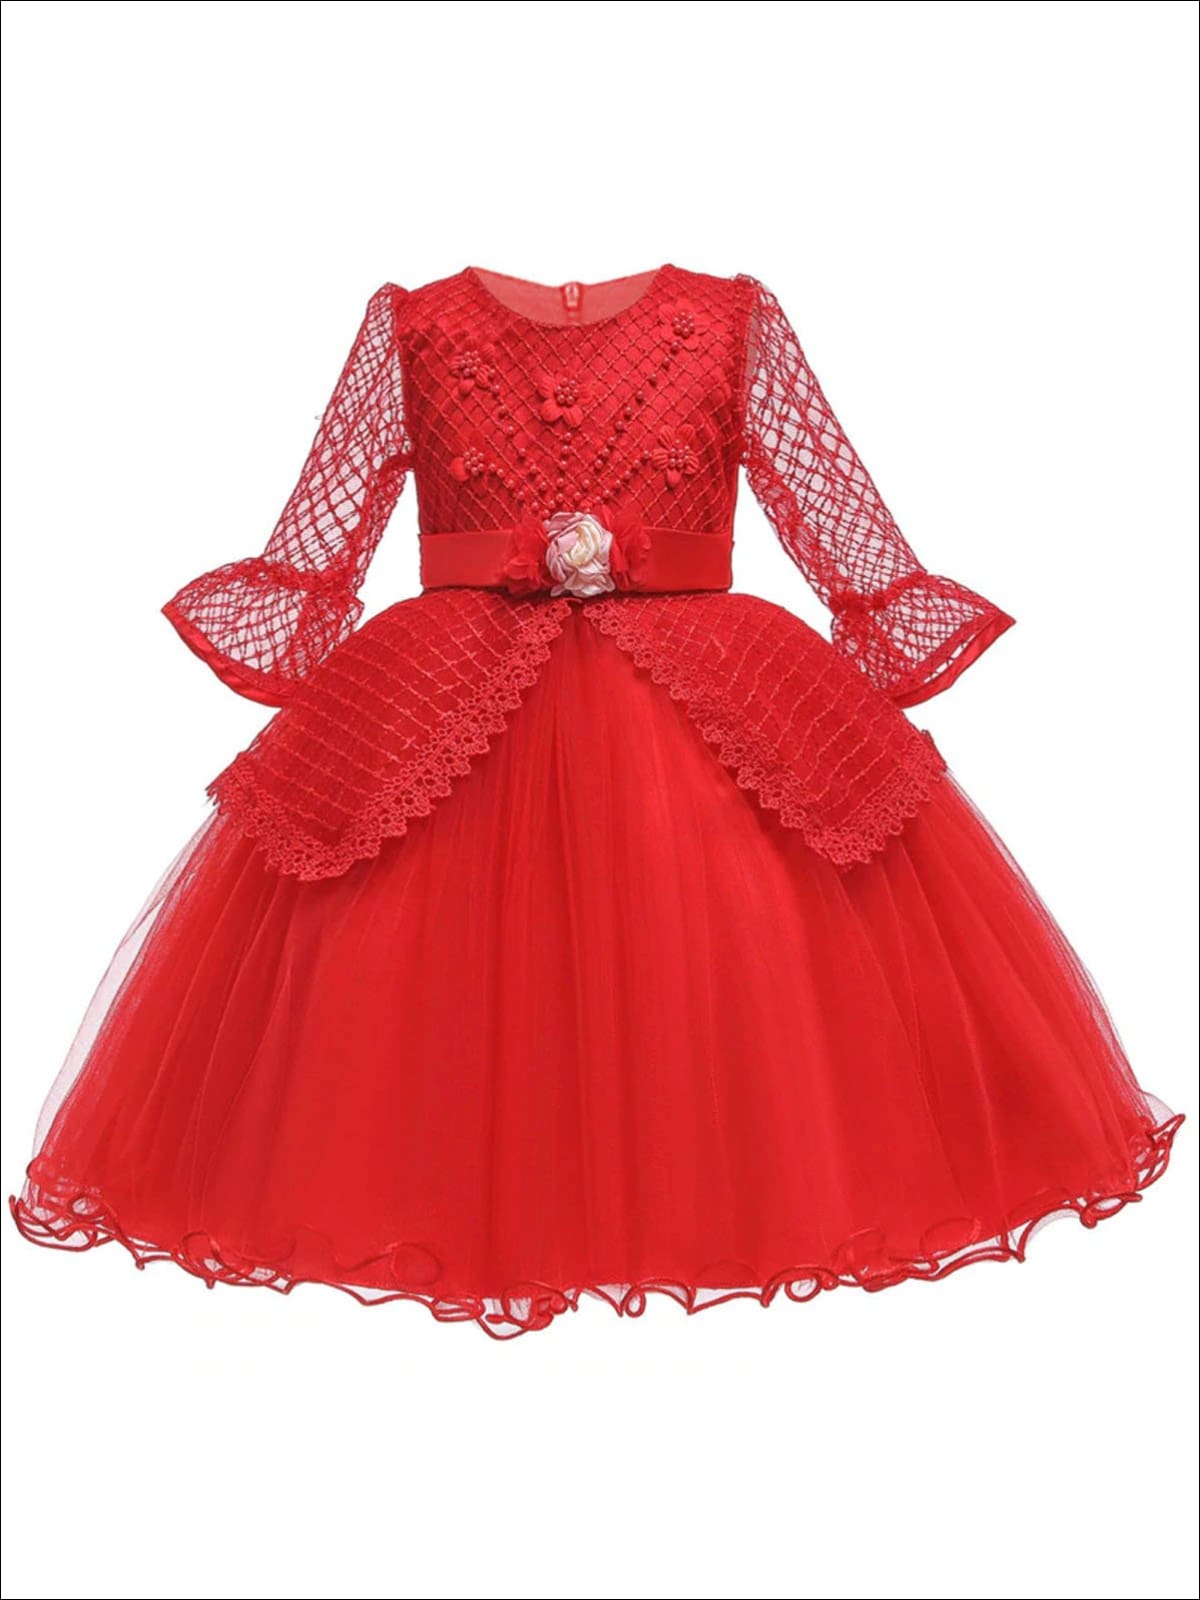 Girls Long Sleeve Lace Princess Holiday Dress With Flower Sash - Red / 3T - Girls Fall Dressy Dress